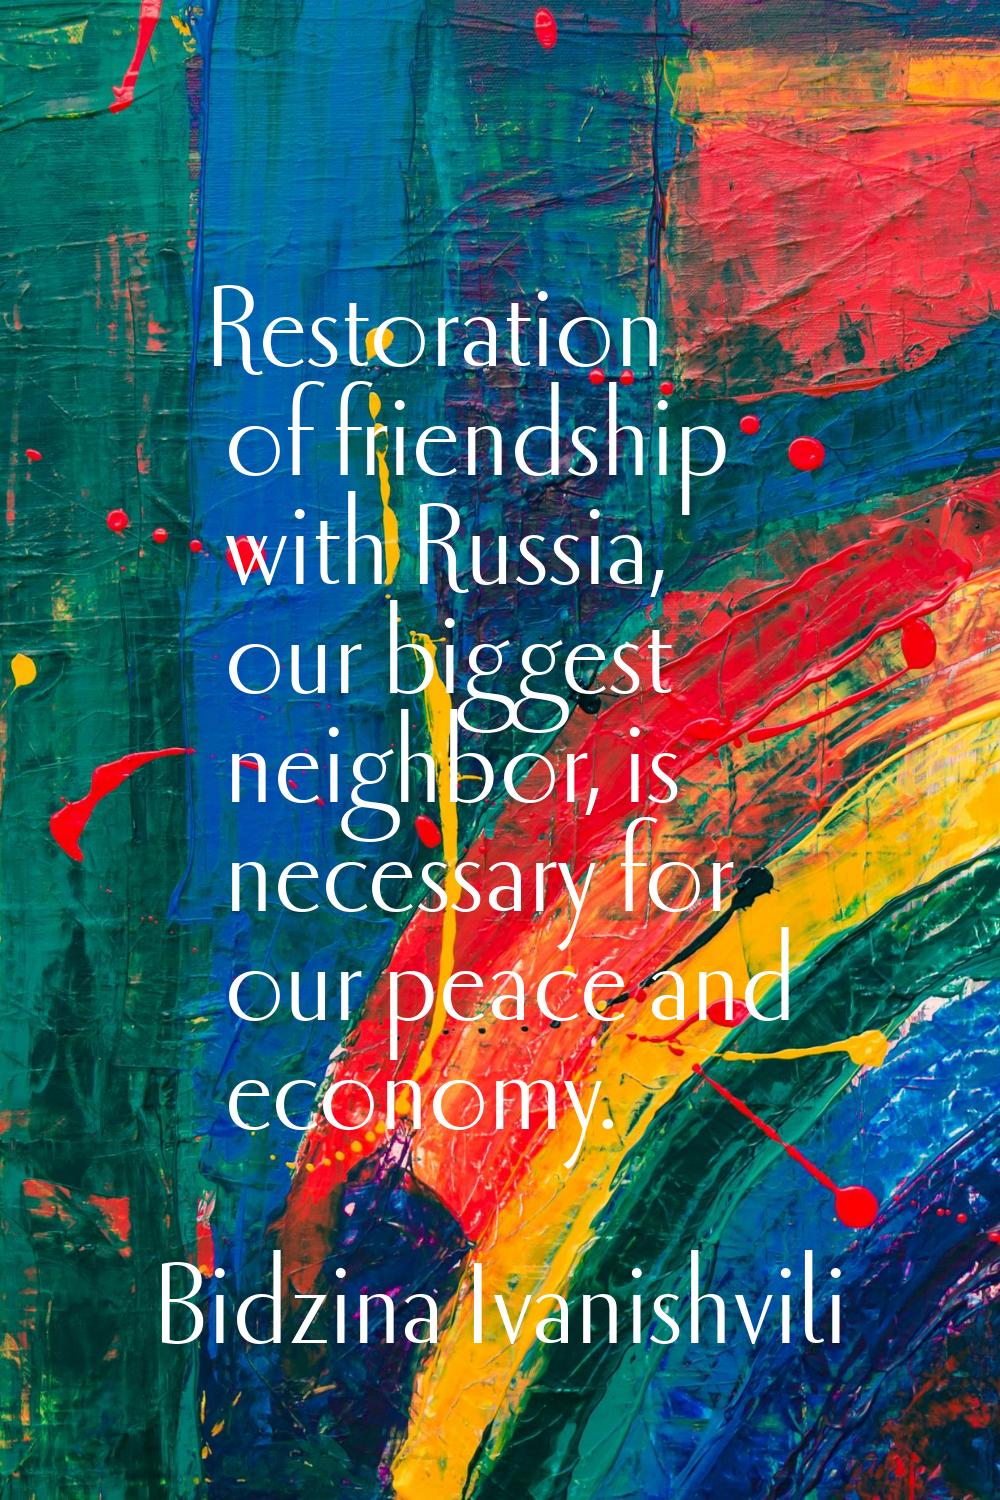 Restoration of friendship with Russia, our biggest neighbor, is necessary for our peace and economy